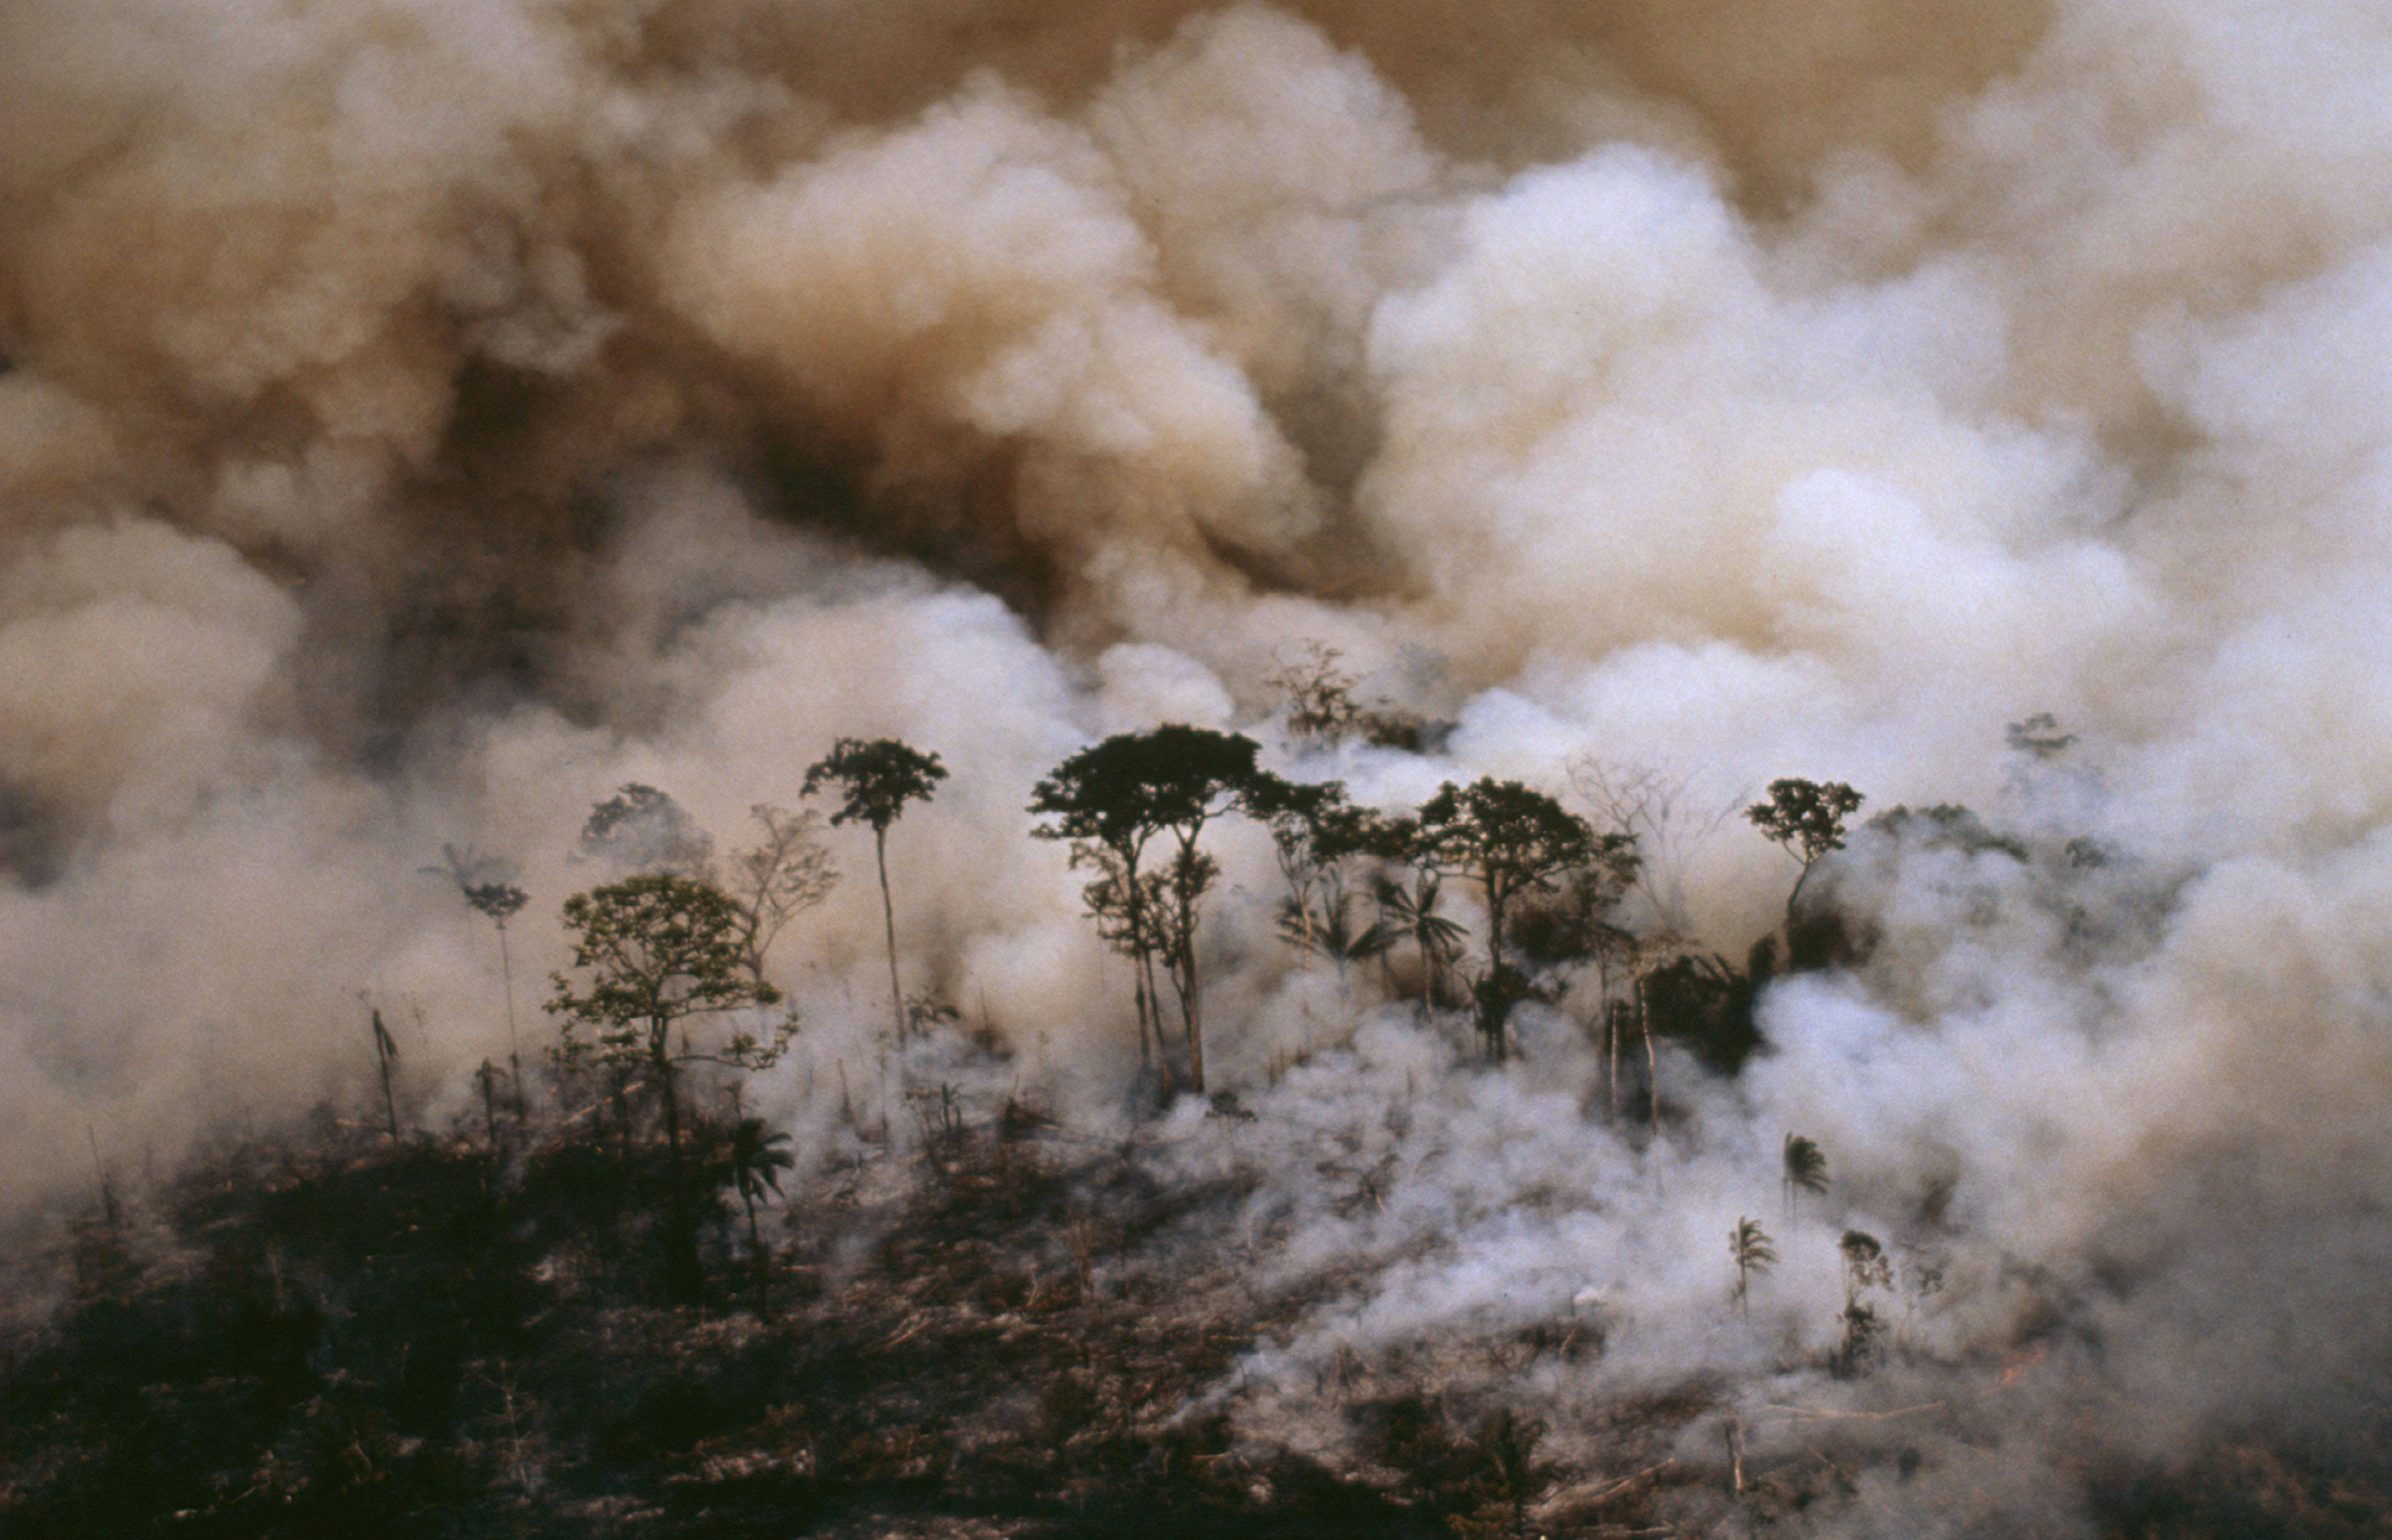 Aerial shot of Acre State showing forest fire. Amazonia, Brazil. Crédit Mark Edwards/WWF